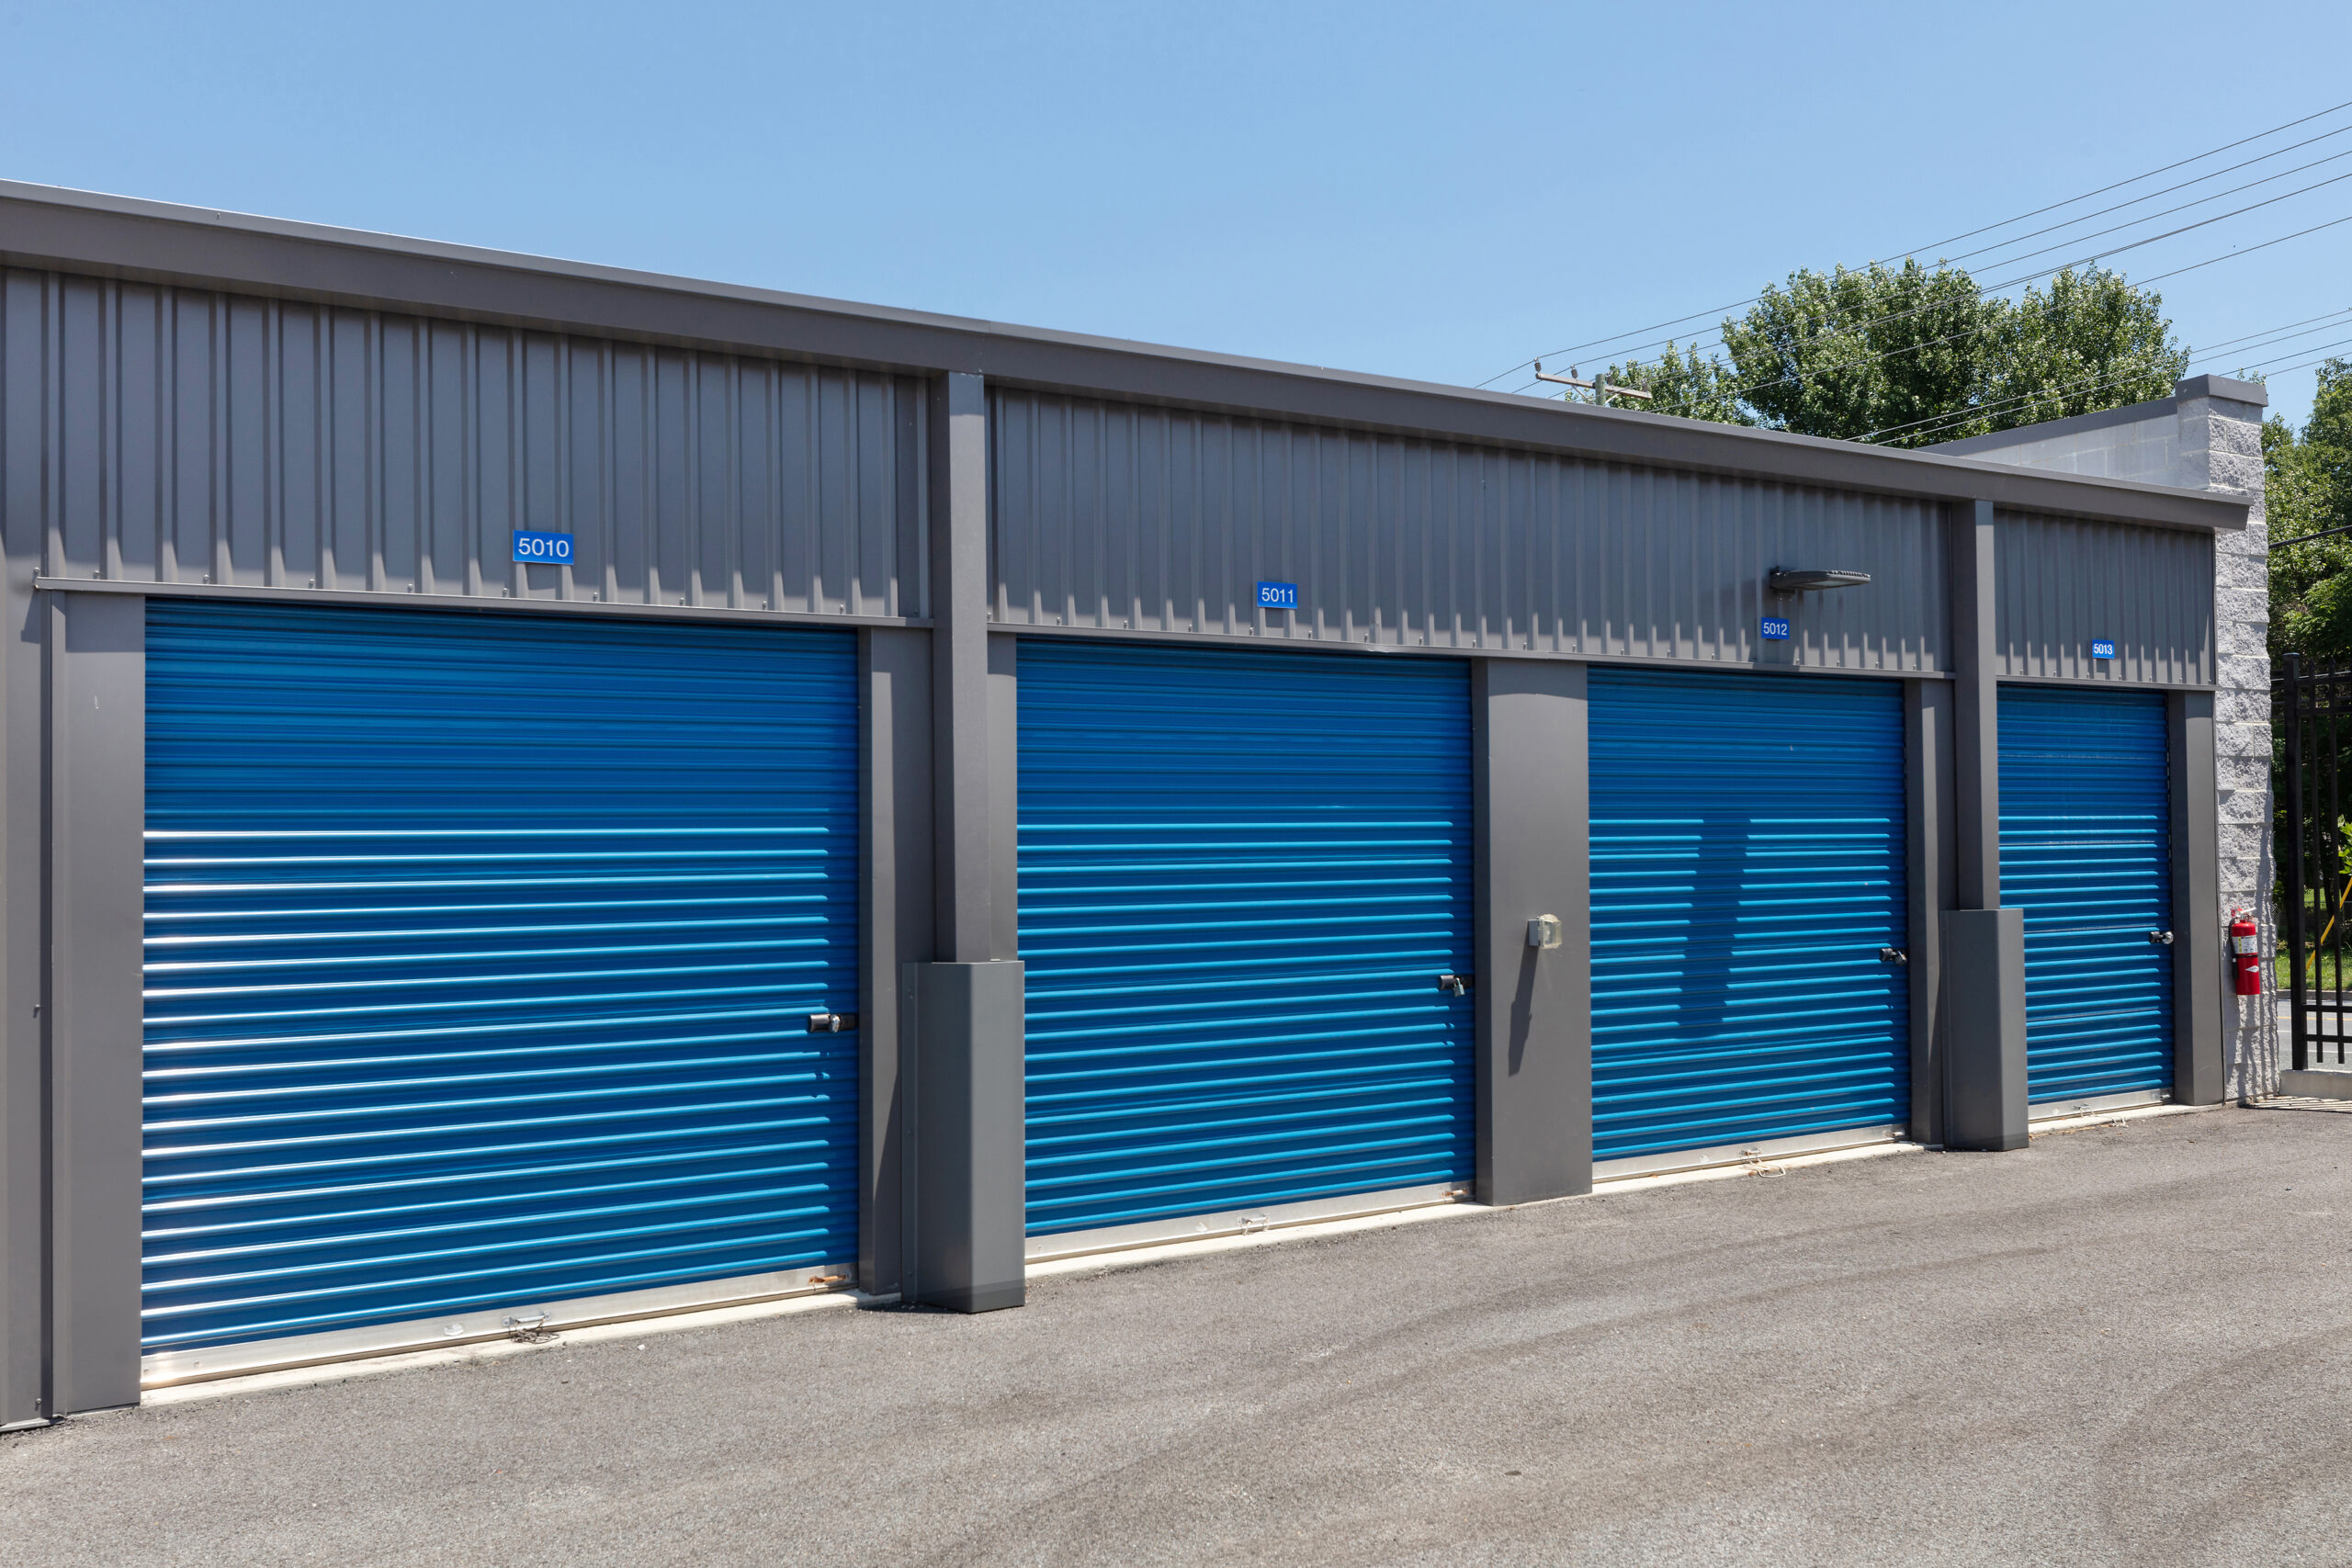 Drive-up units at Self Storage Plus in Middle River.